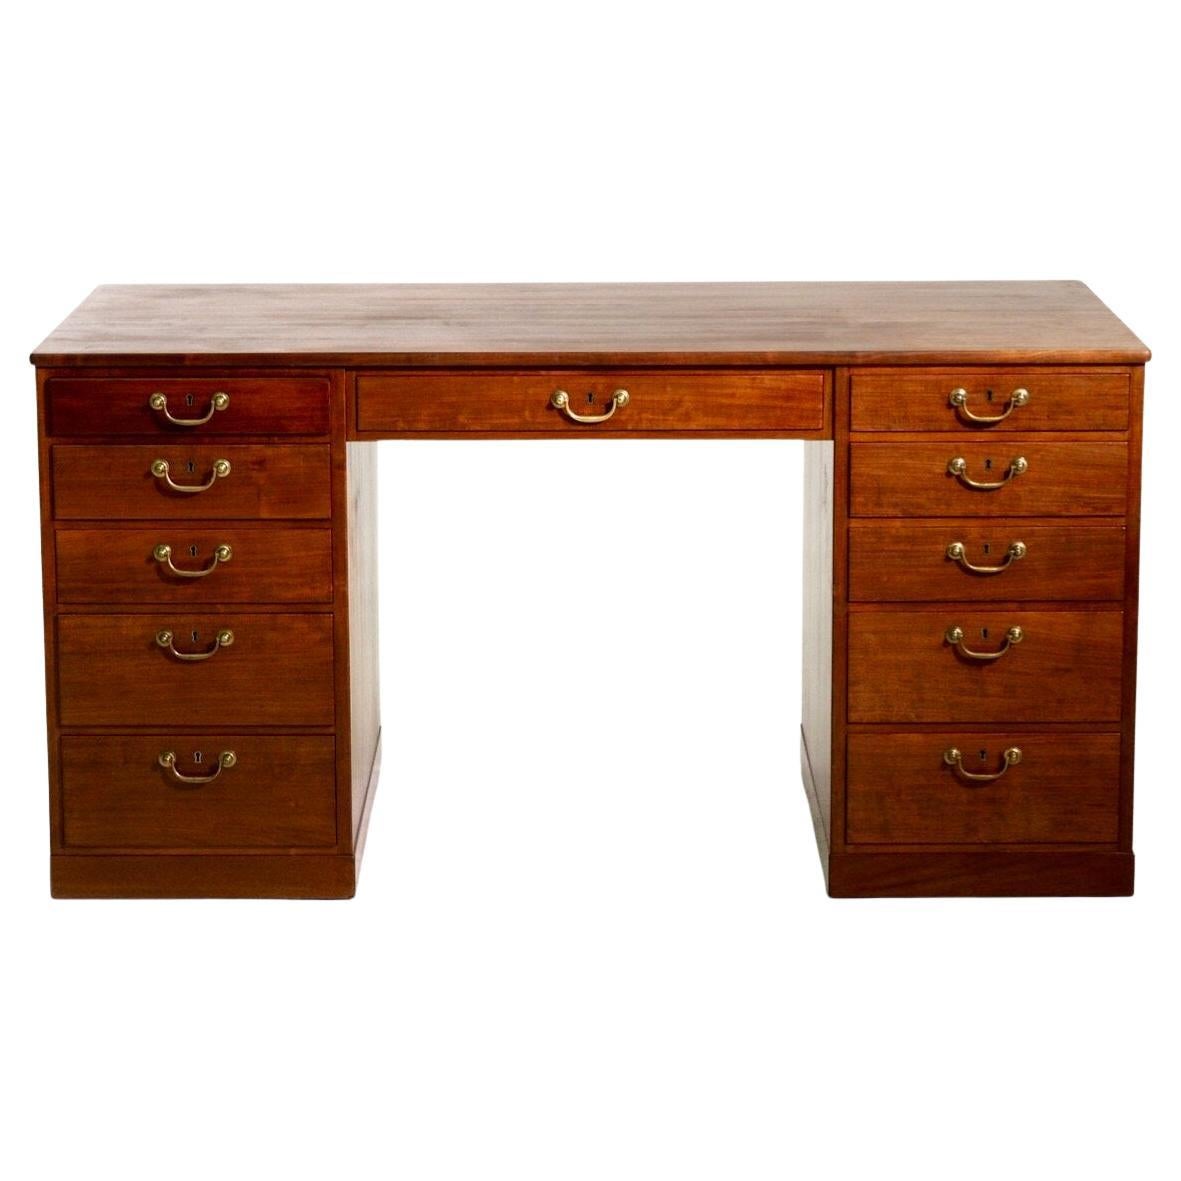 Desk in Mahogany by Ole Wanscher '1903 - 1985'